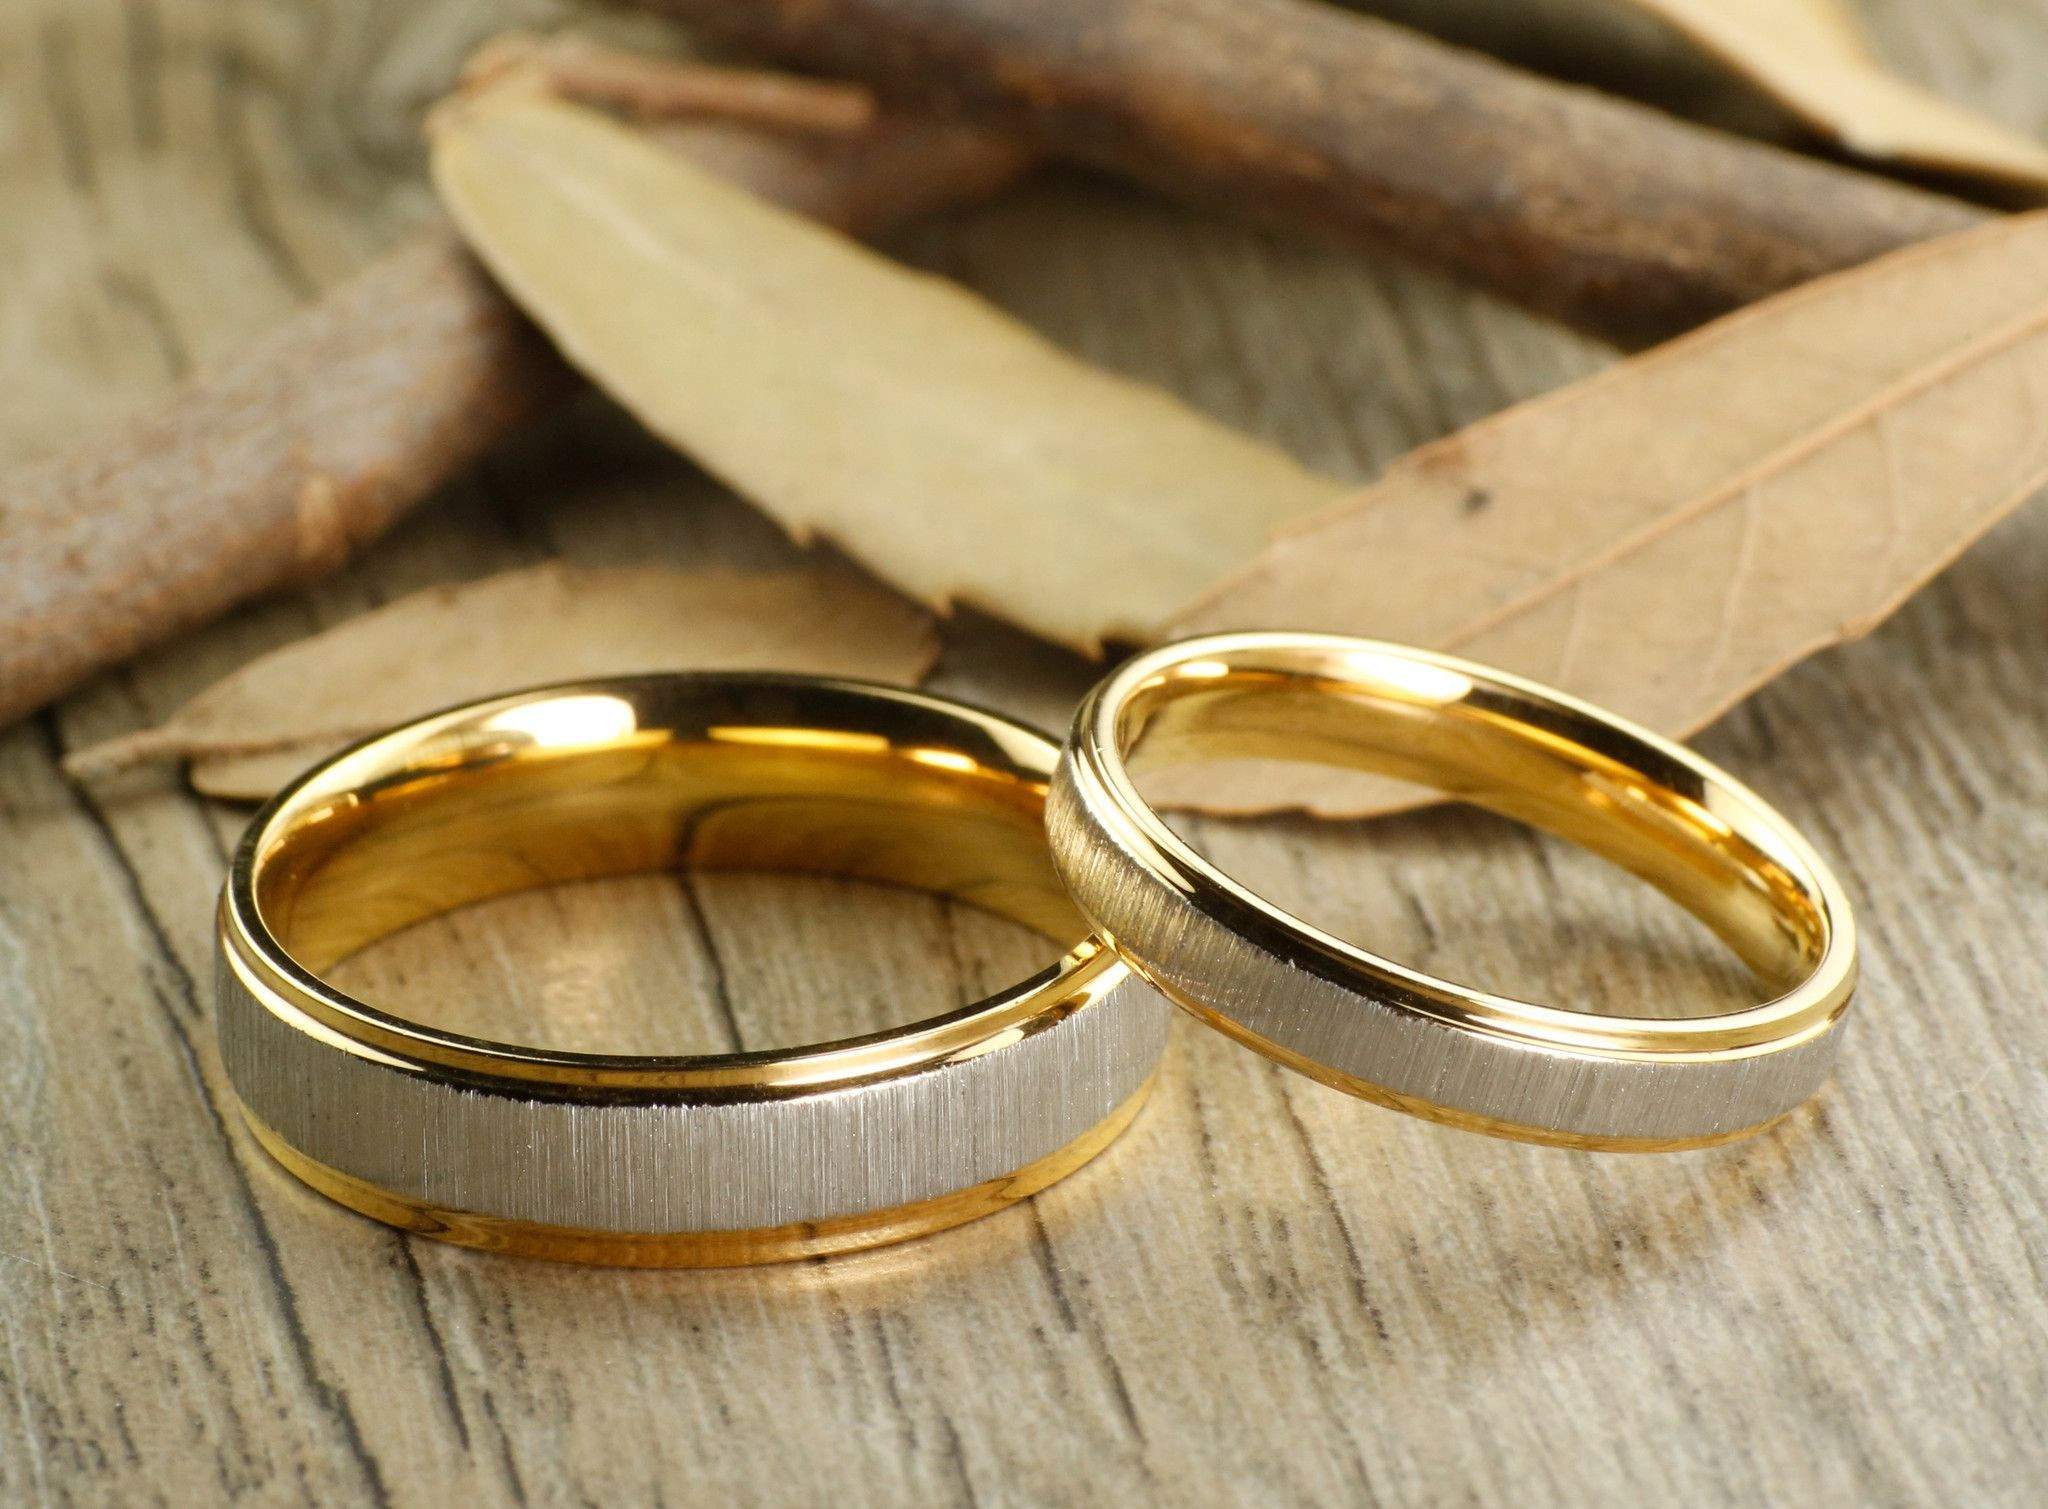 Gold Wedding Rings Sets For Him And Her Lovely Handmade His And Her 18k Gold Wedding Titanium Rings Set Of Gold Wedding Rings Sets For Him And Her 